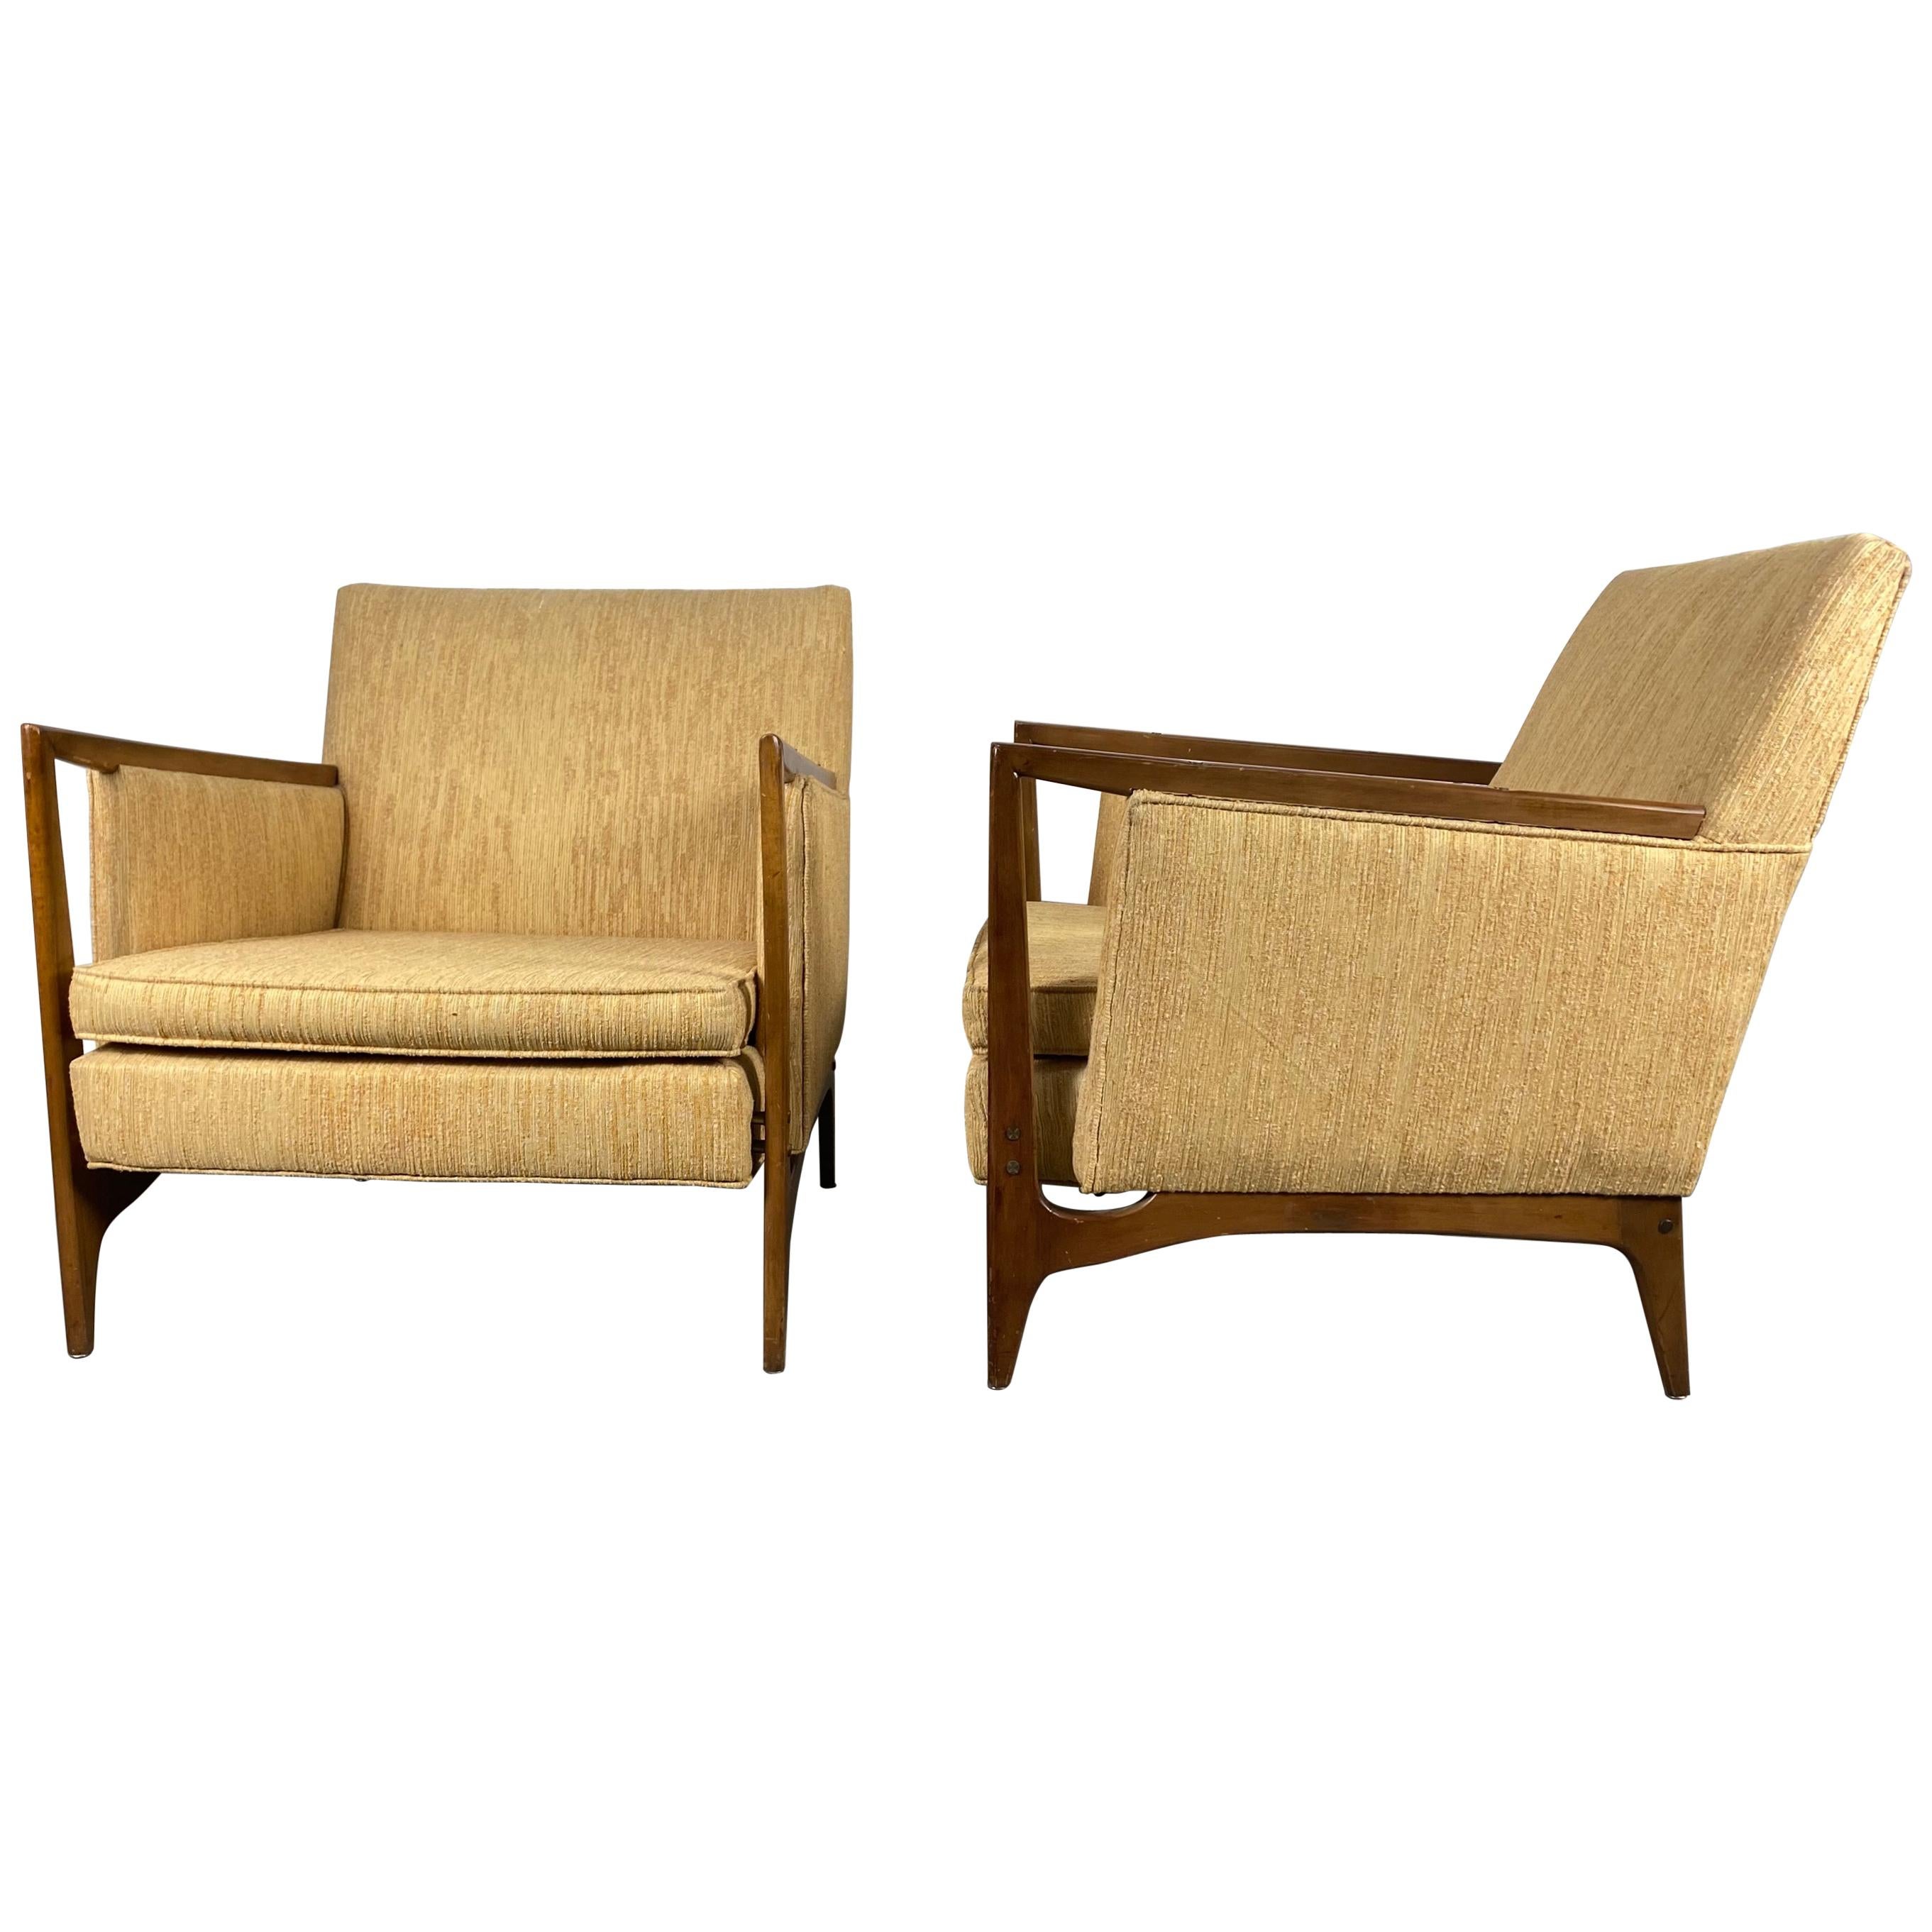 Stunning Pair of Mid-Century Modernist Lounge Chairs Attributed to Dux of Sweden